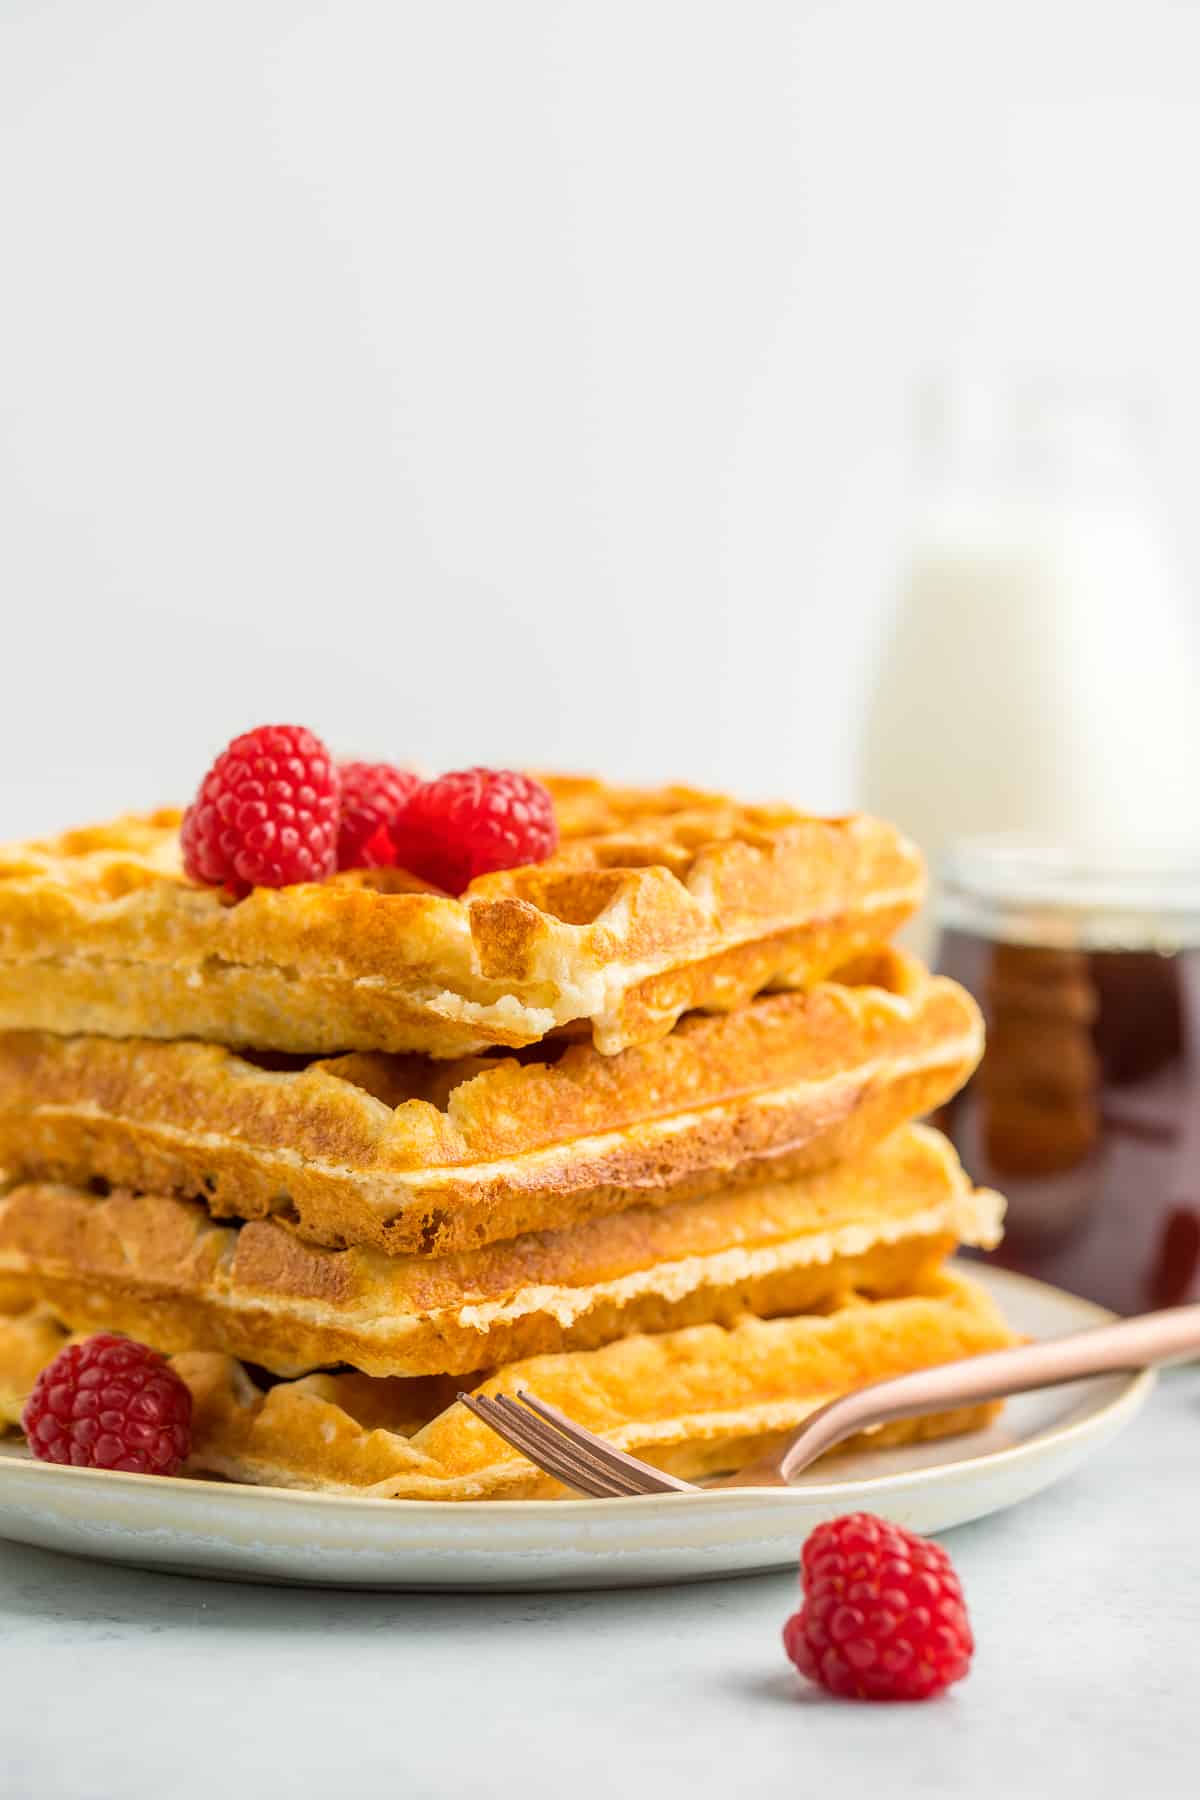 a stack of 4 whole wheat waffles on a plate topped with raspberries.